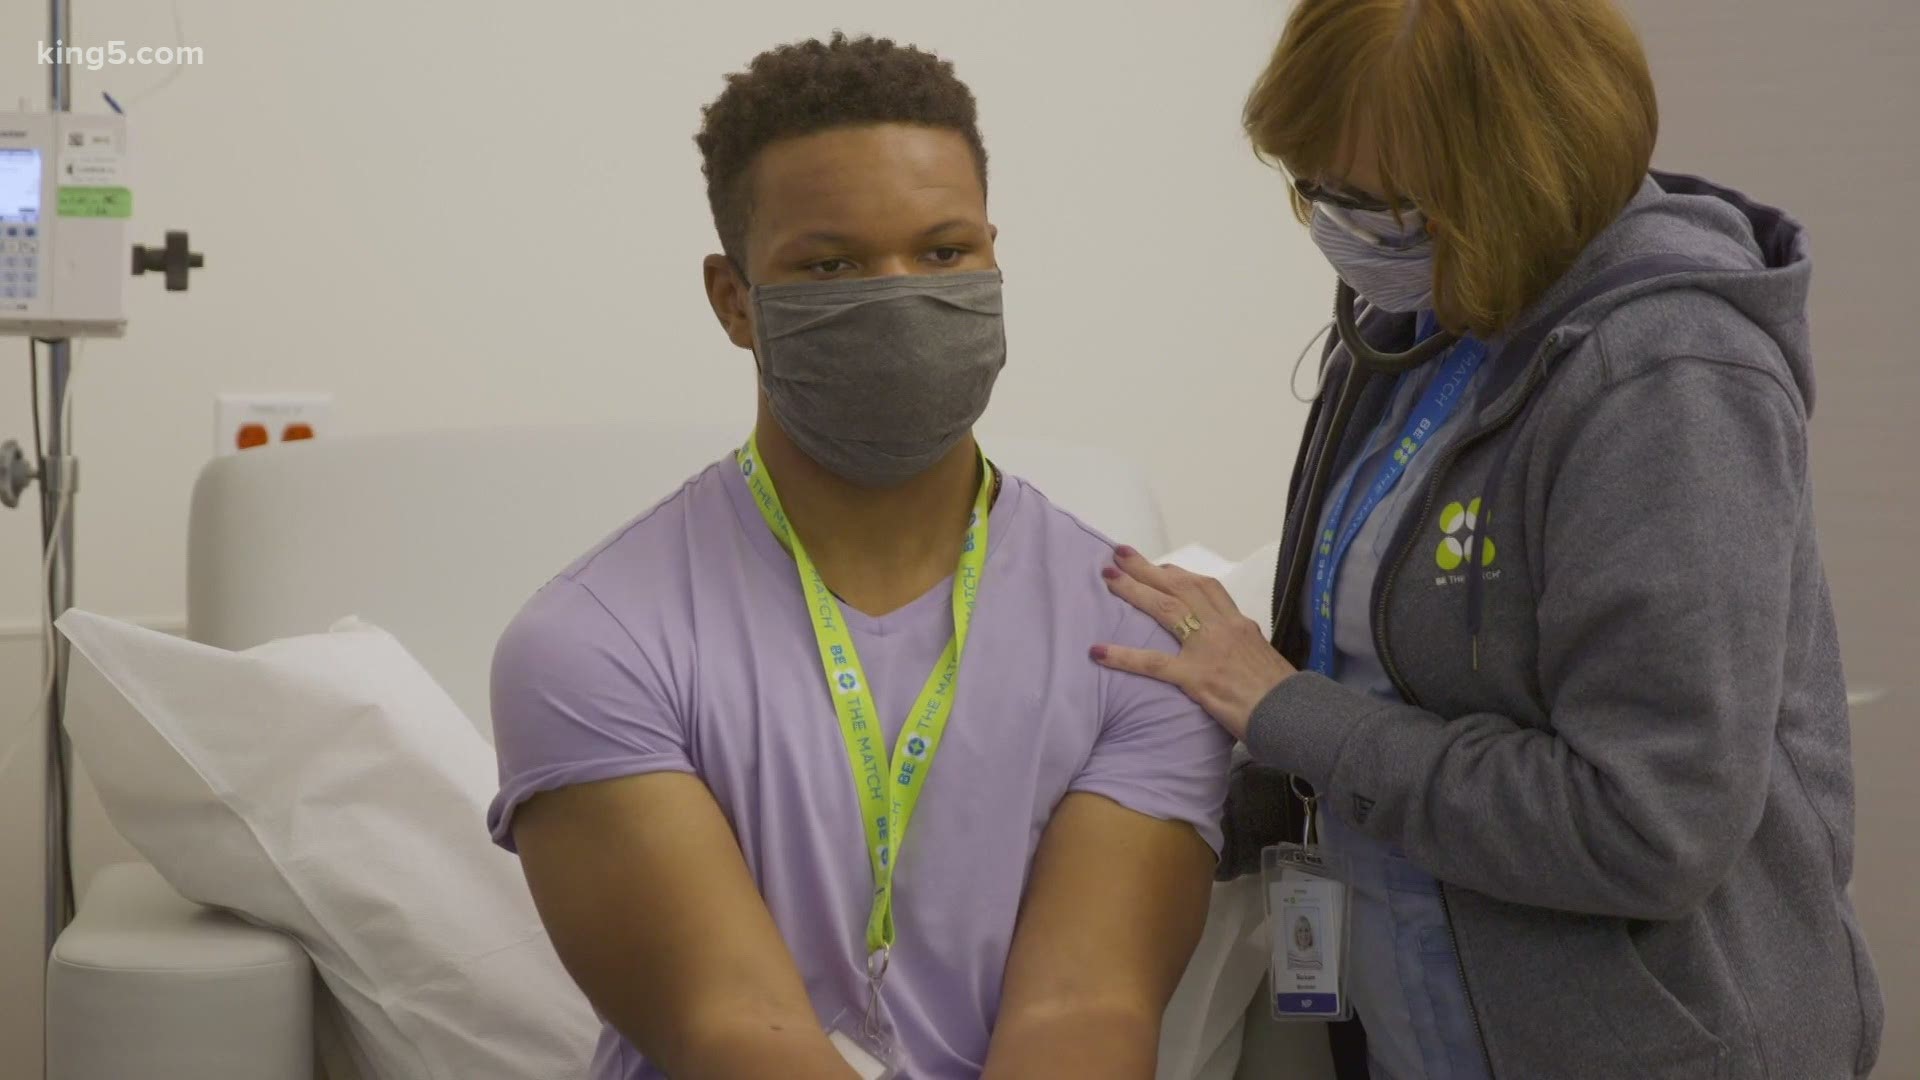 Black patients in need of bone marrow or blood stem cell treatments have a decreased chance of matching with a donor. The Seattle branch hopes to change that.